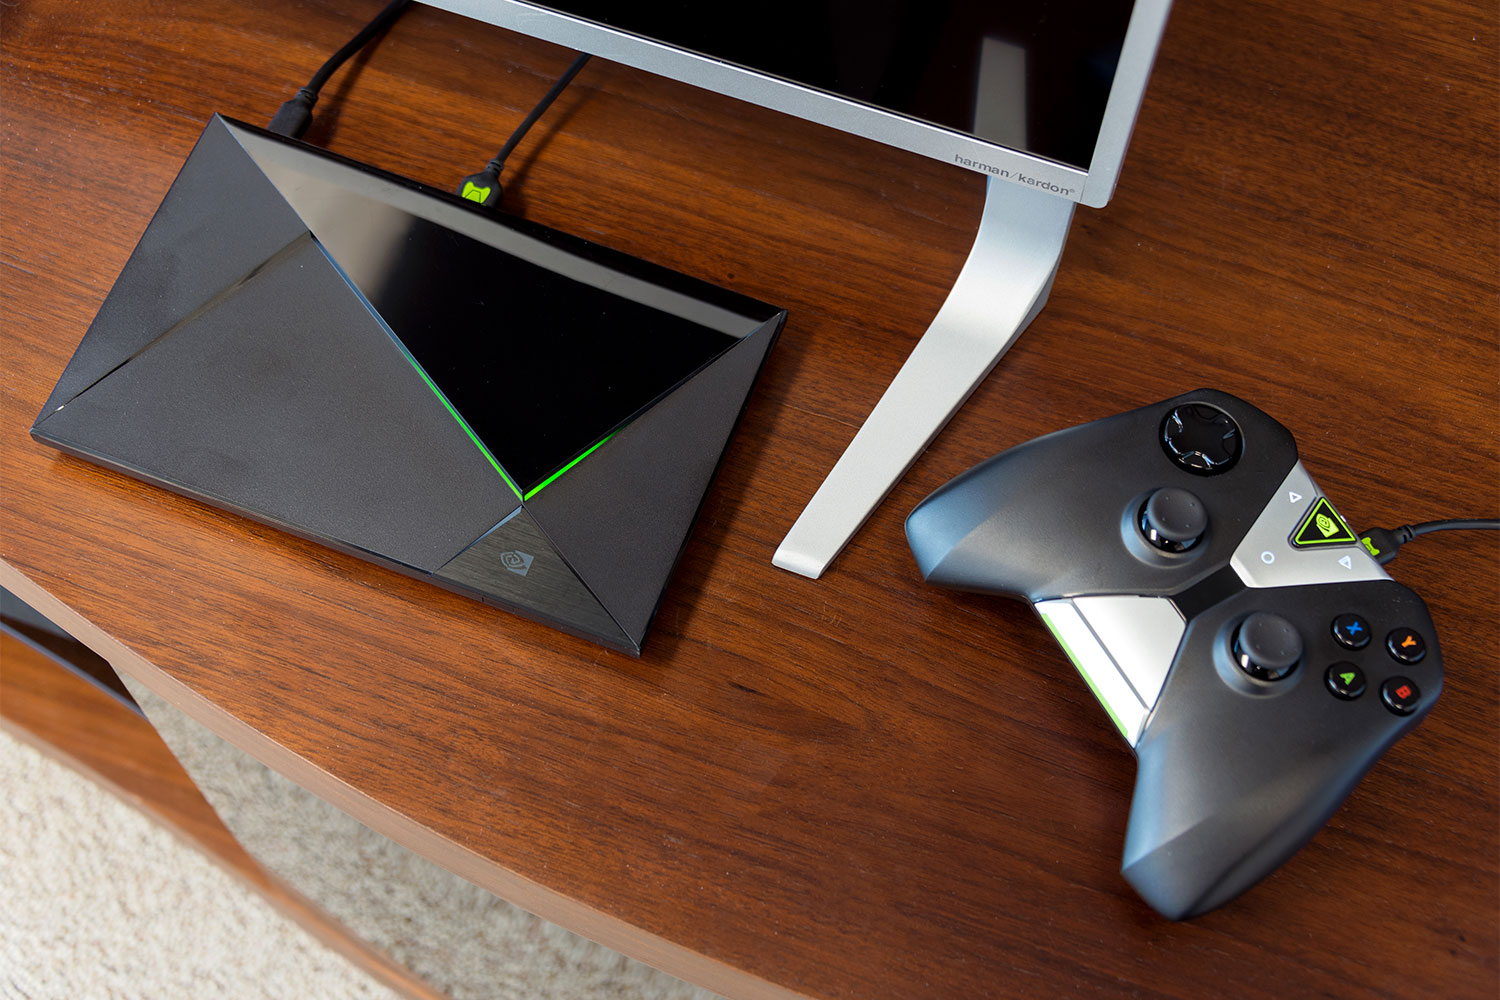 Nvidia Shield TV users will lose access to GameStream starting in 2023